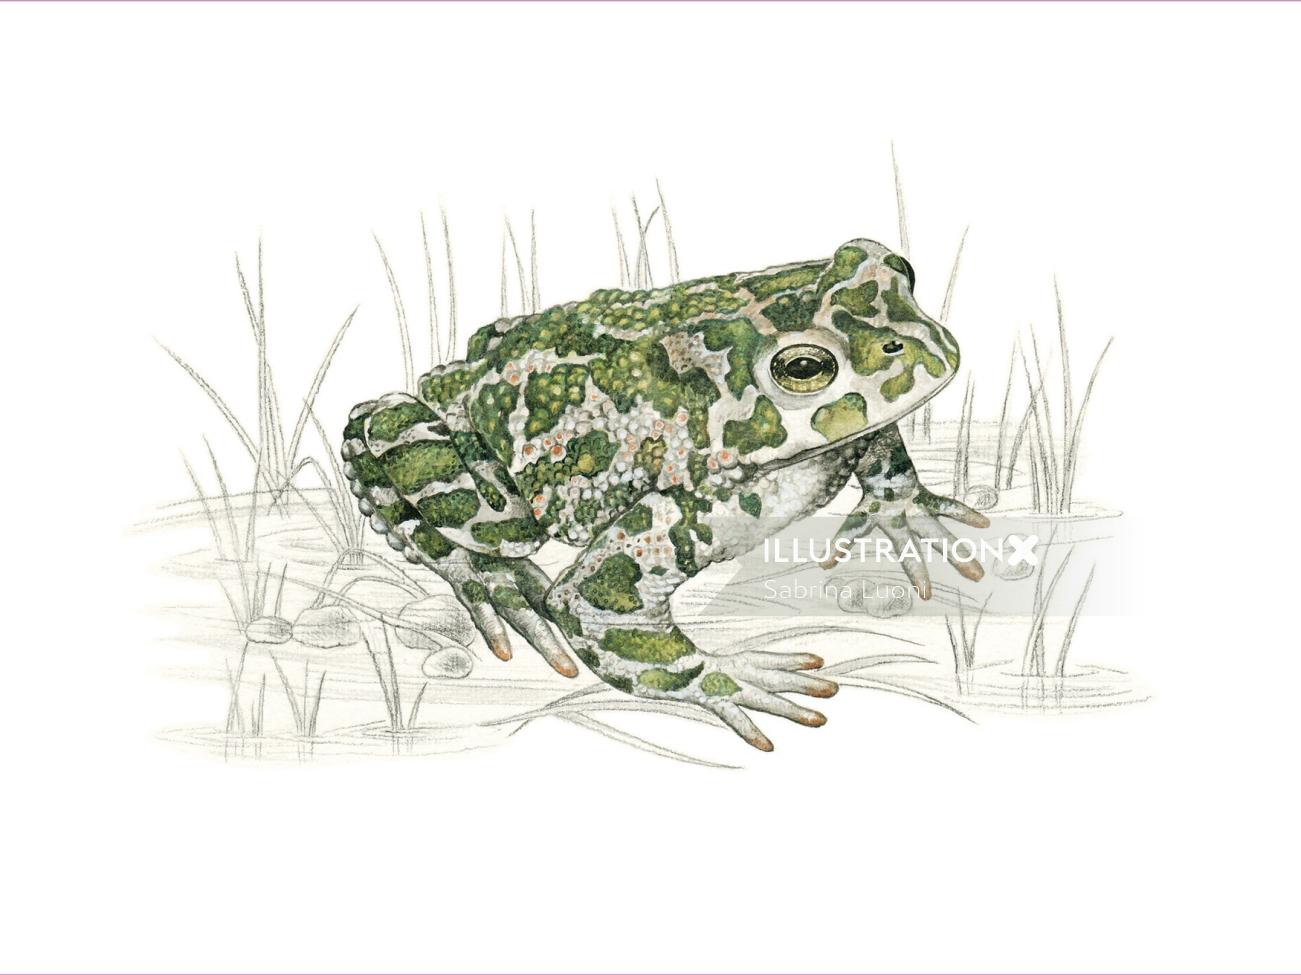 Vivid depiction of a Green Toad